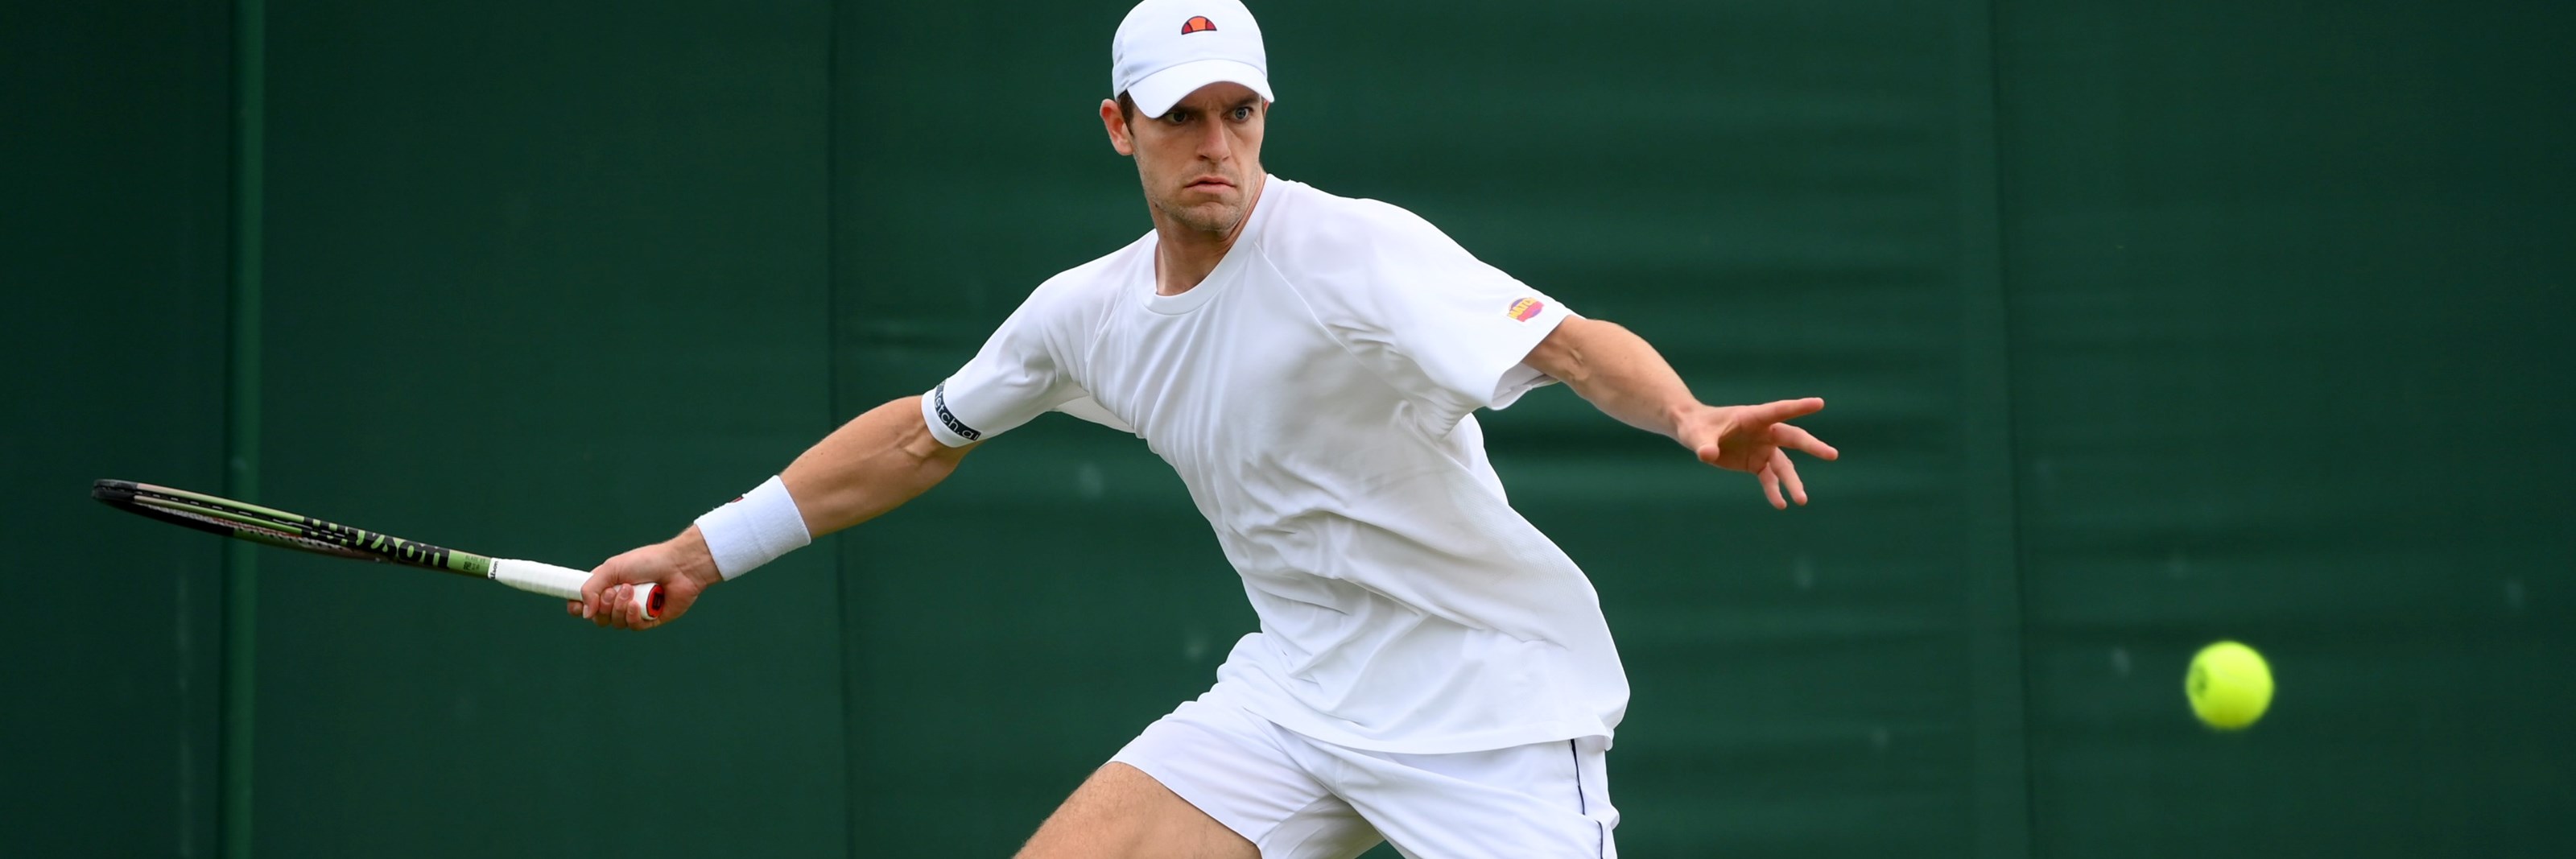 Alastair Gray in action during his second round match against Taylor Fritz at Wimbledon 2022